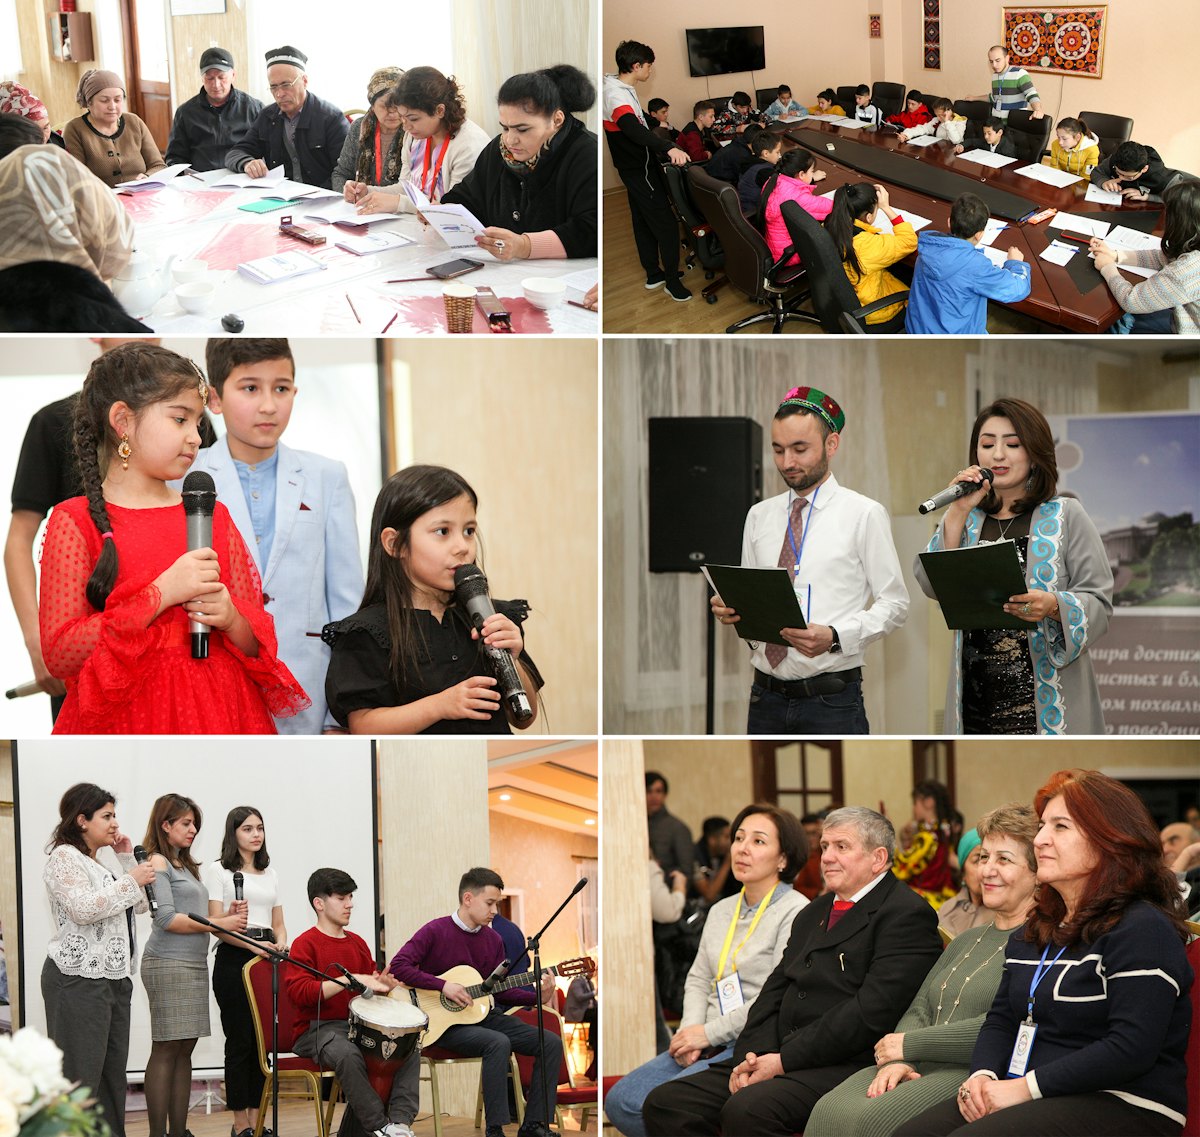 The conference in Khujand, Tajikistan, comprised smaller simultaneous gatherings for children, youth, and adults.